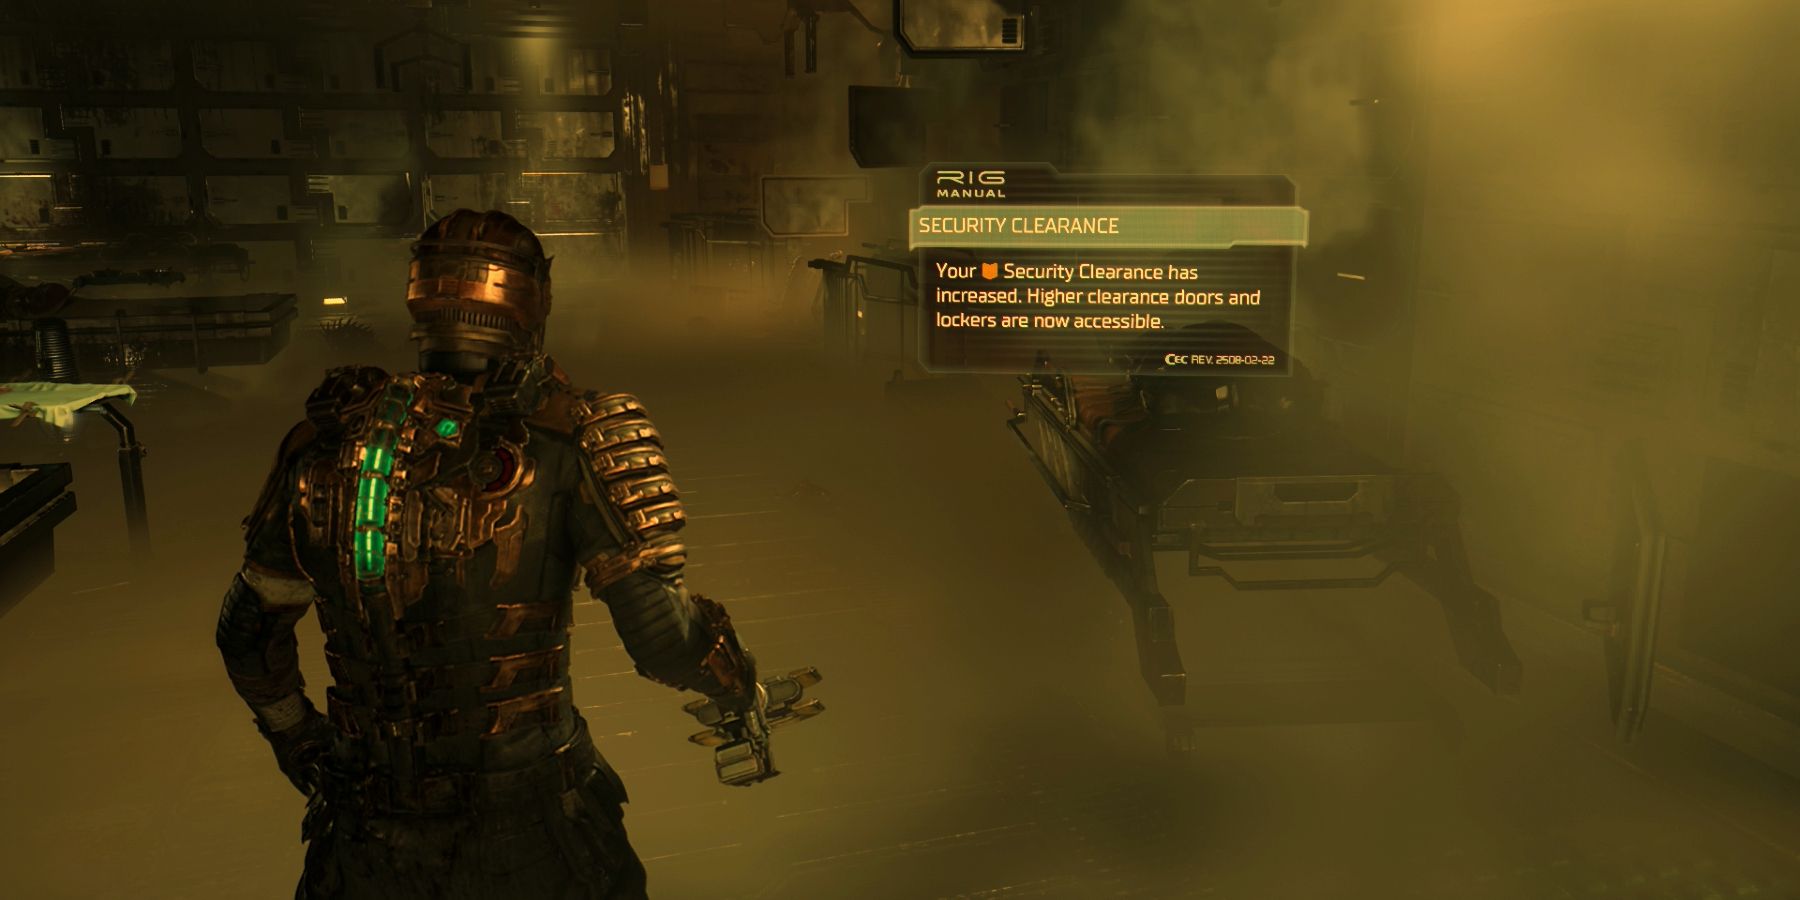 Dead Space 3 - RIG Master Guide 